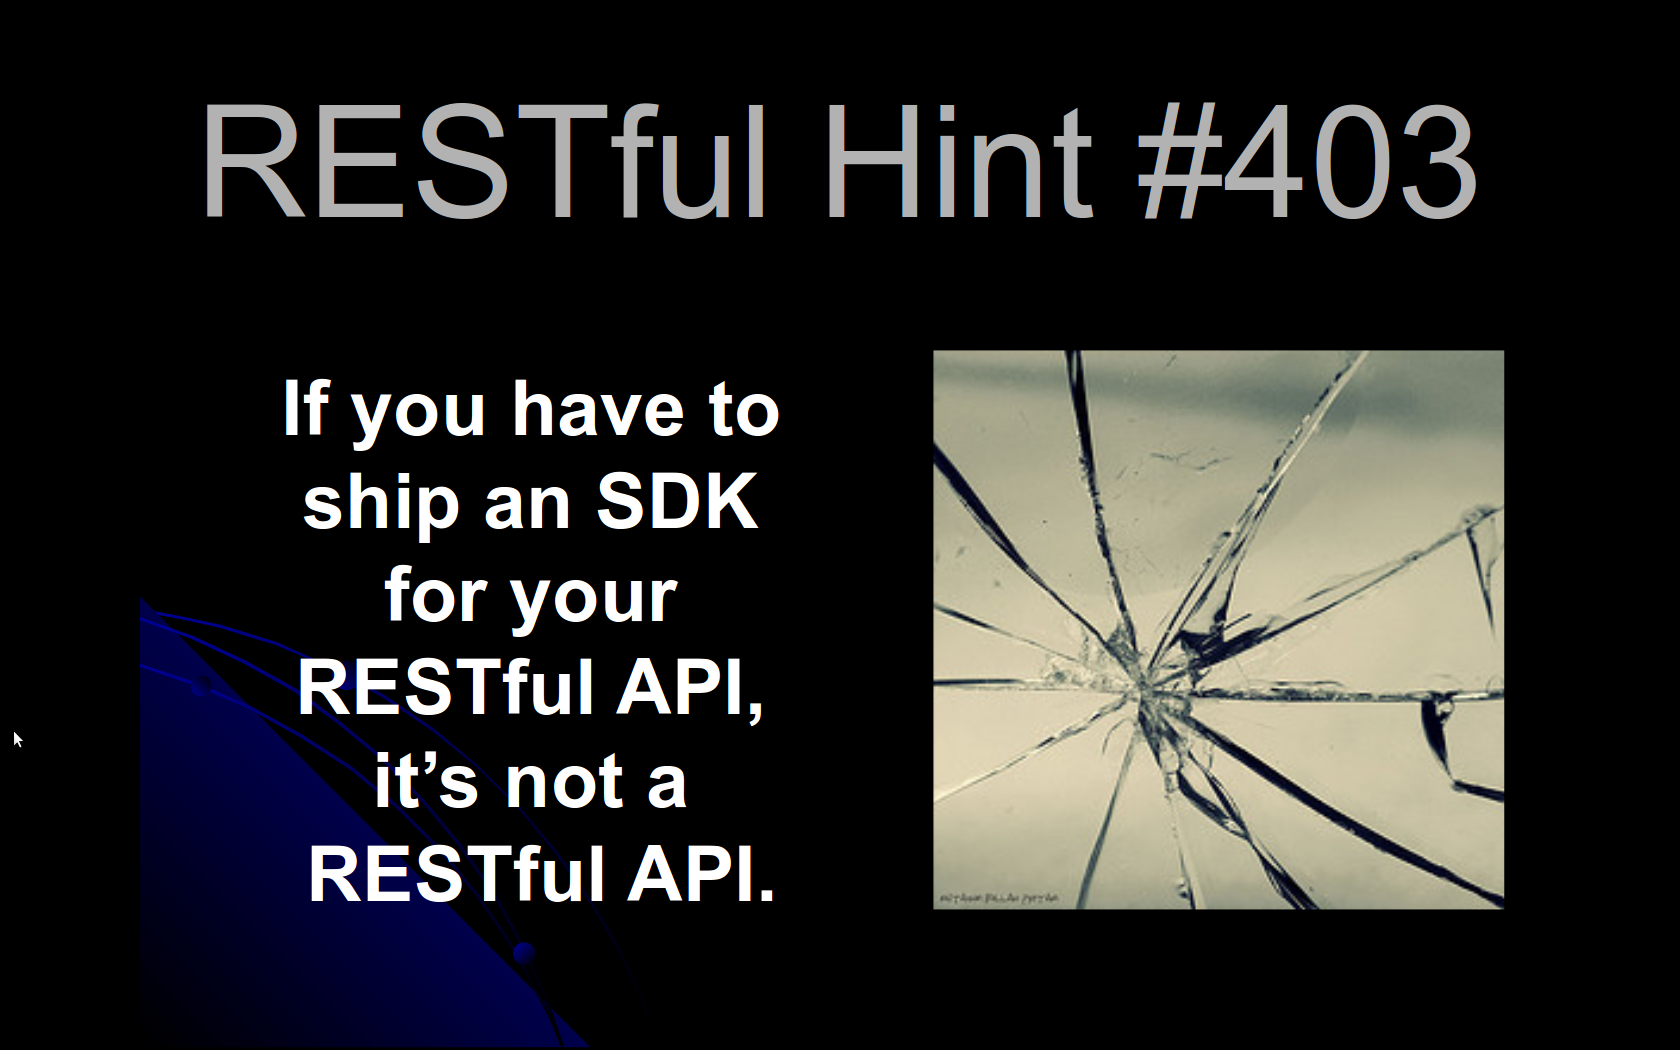 If you have to ship an SDK for your RESTful API, it is not a RESTful API